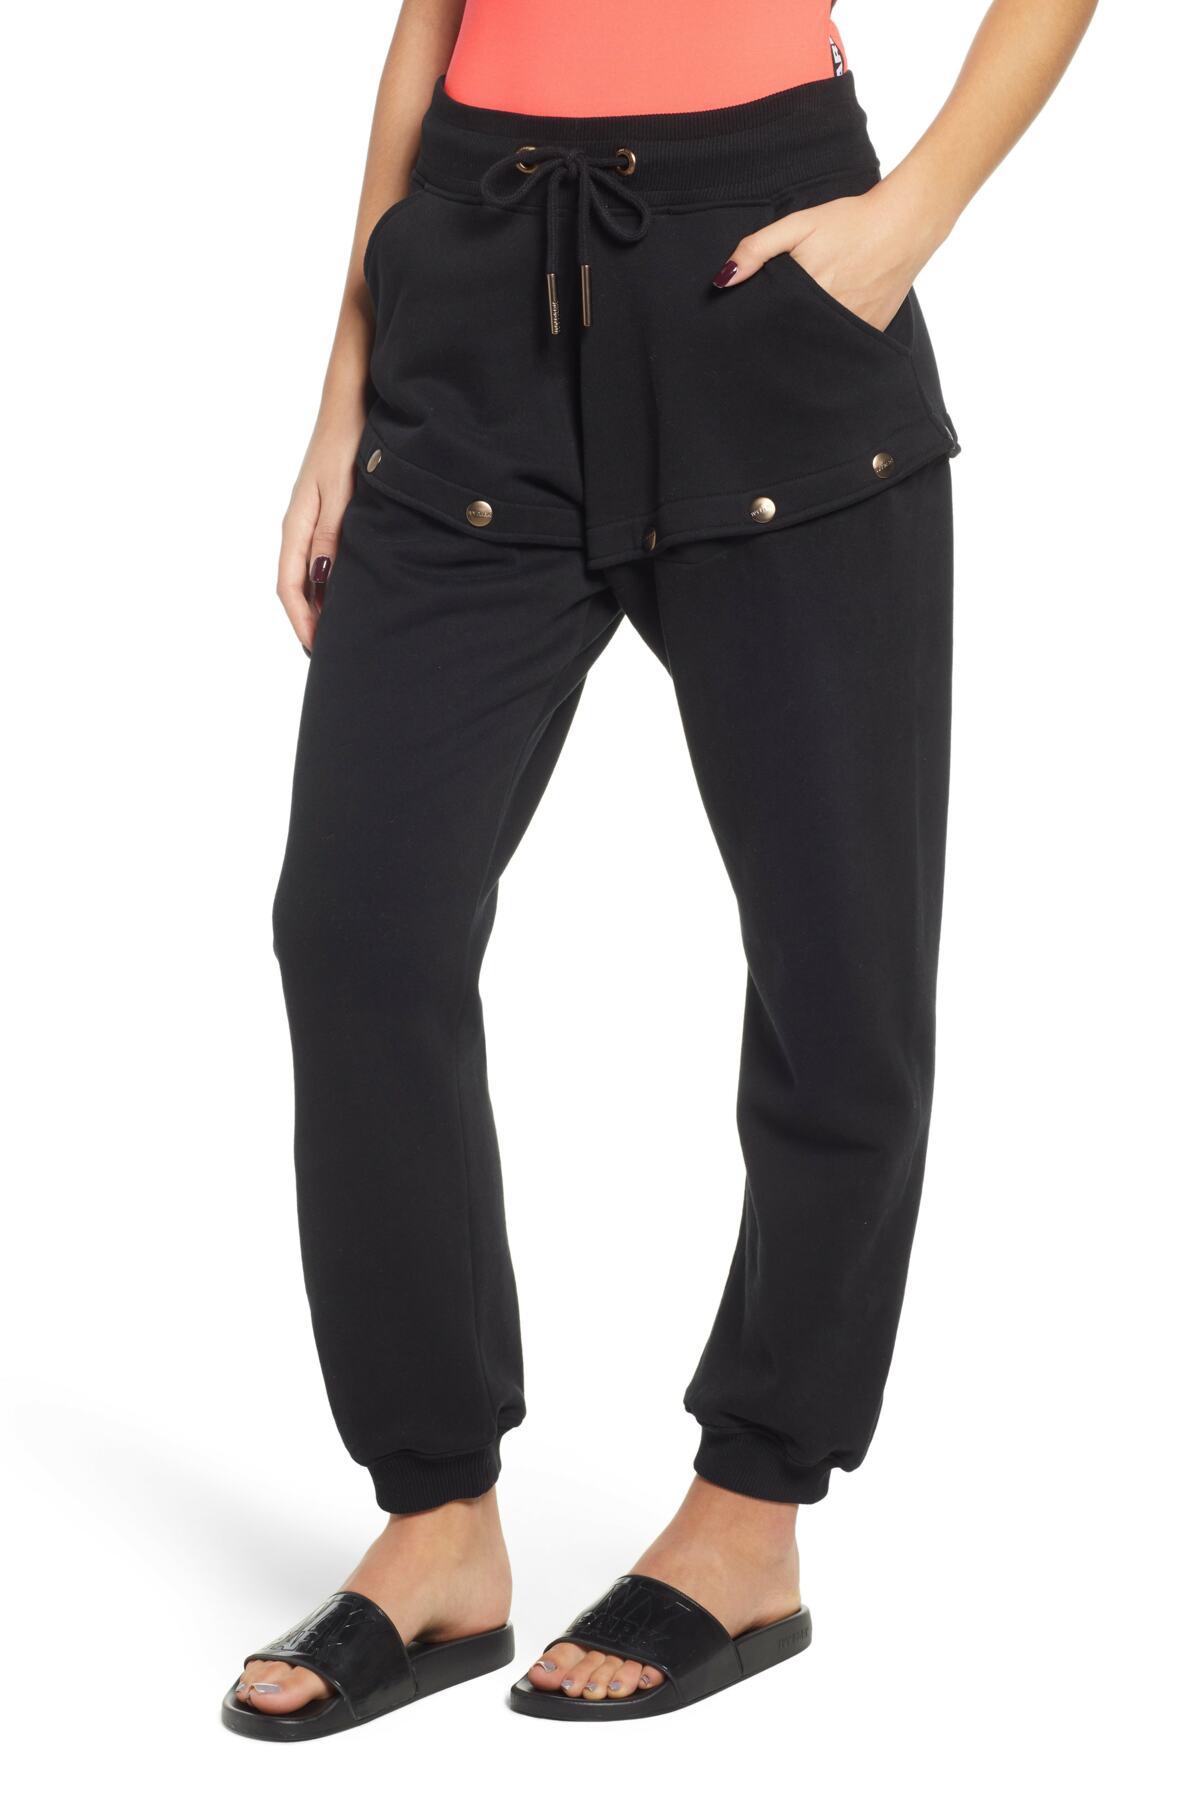 Lyst - Ivy Park (r) Armour Popper Convertible Joggers in Black1200 x 1800